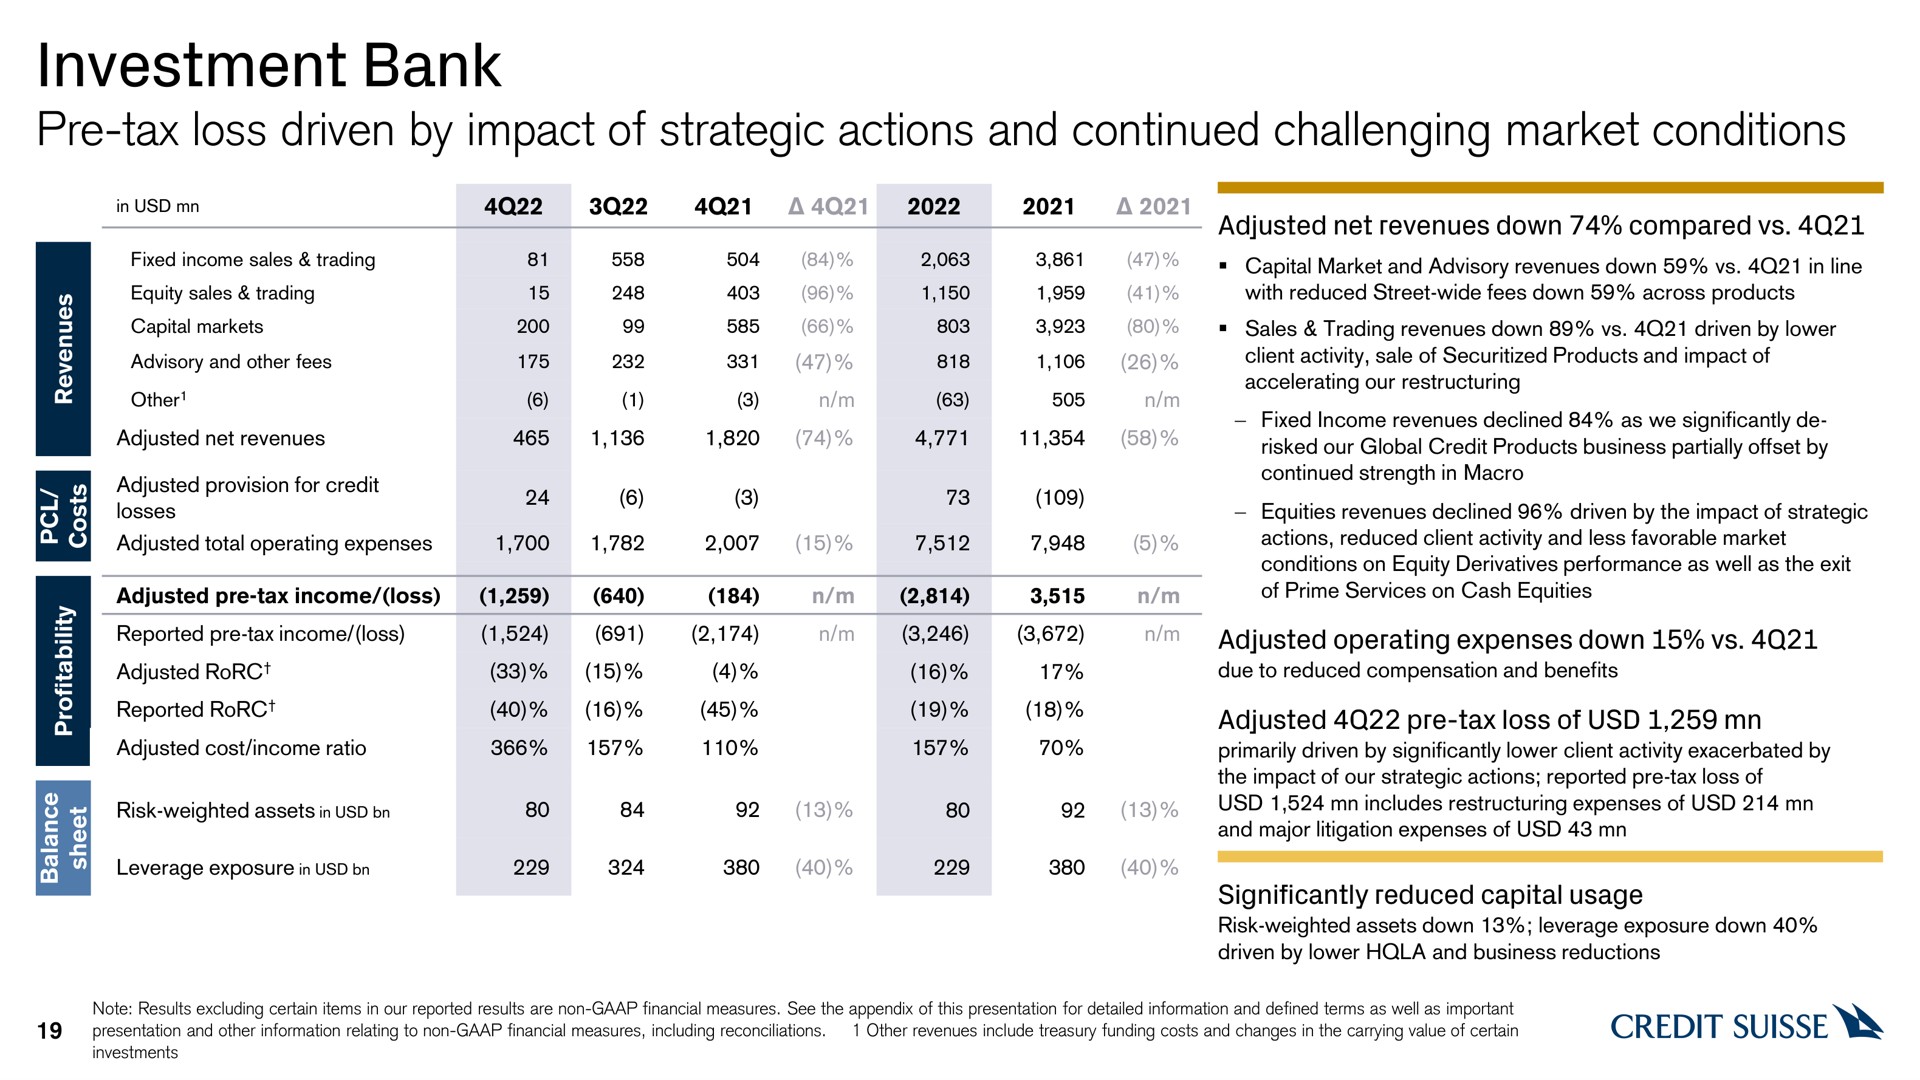 investment bank tax loss driven by impact of strategic actions and continued challenging market conditions | Credit Suisse